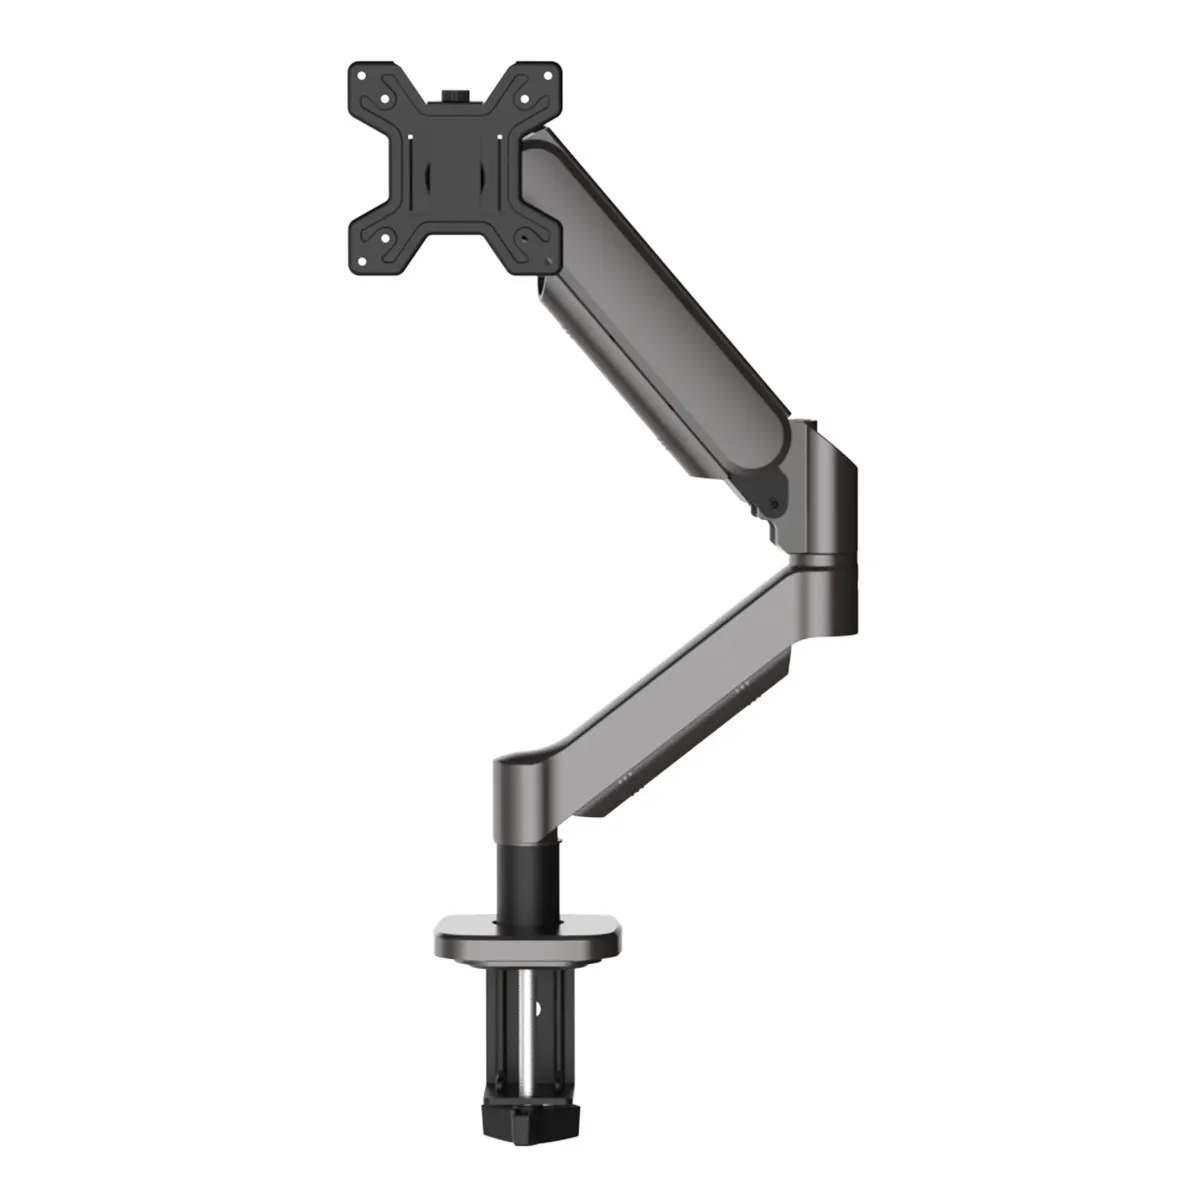 Hot Selling New Gas Spring Monitor Arm Single Computer Desk Monitor Mount Stand Height Adjustable 13"-32" Screen Stock